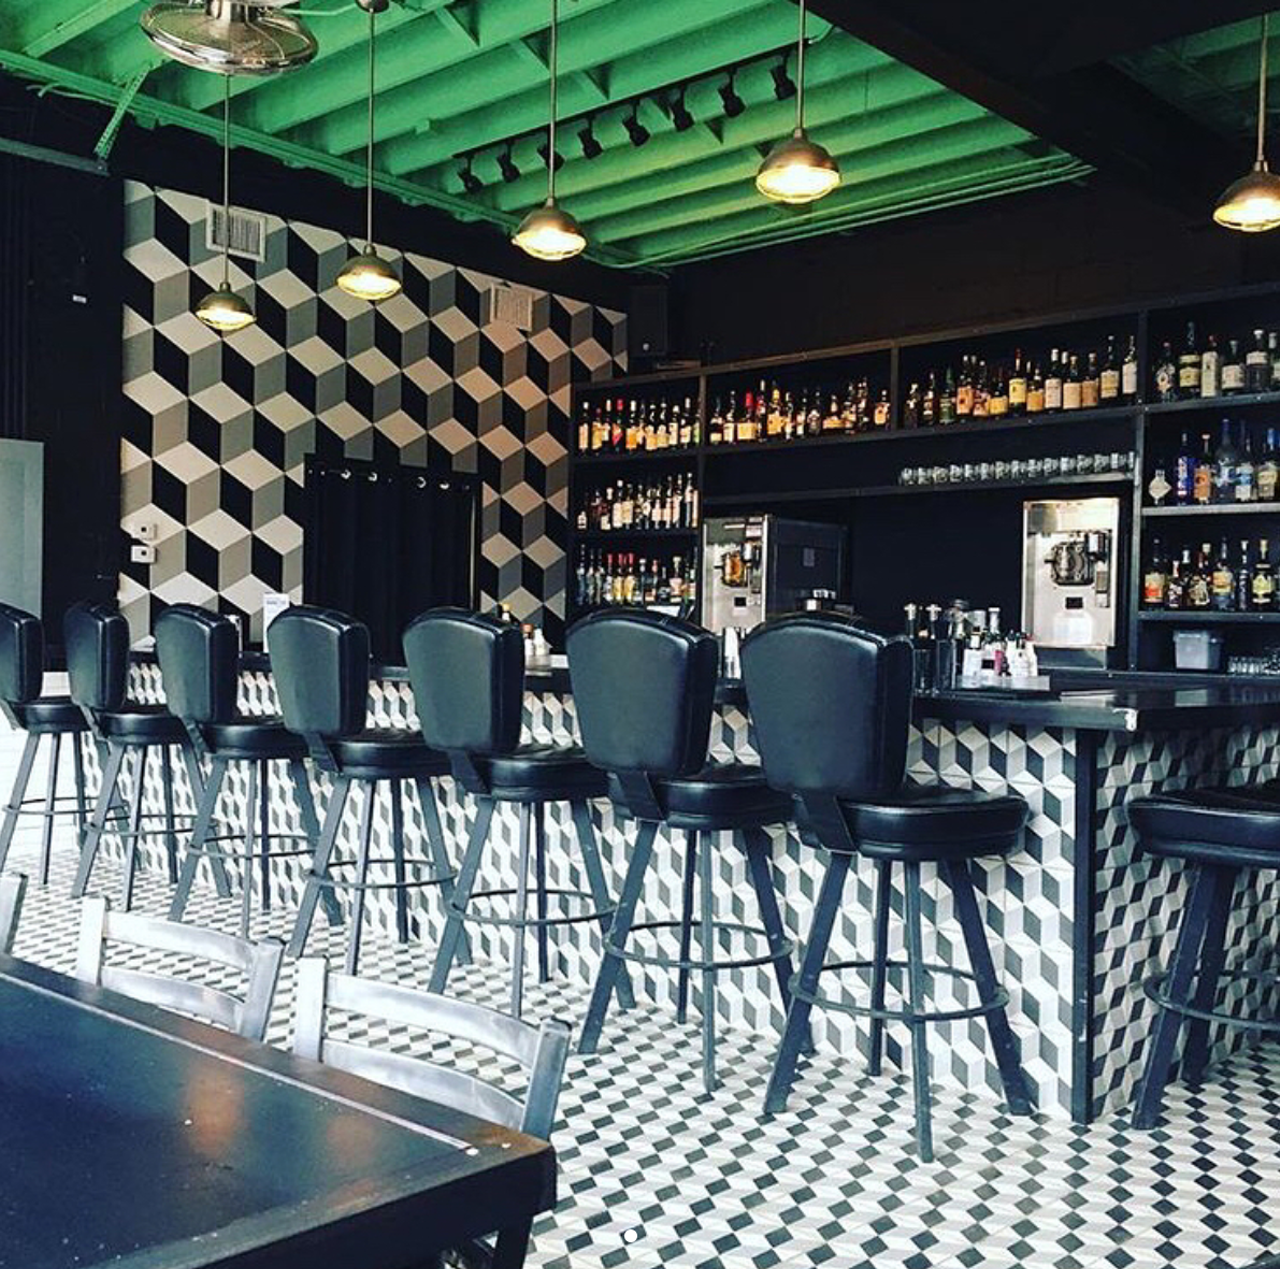 Rumble
2410 N. St. Mary’s St., (210) 365-3246, rumblesatx.com
Catch all the action on the St. Mary’s Strip from this bar’s patio while enjoying themed cocktails and more.
Photo via Instagram / rumble_sa